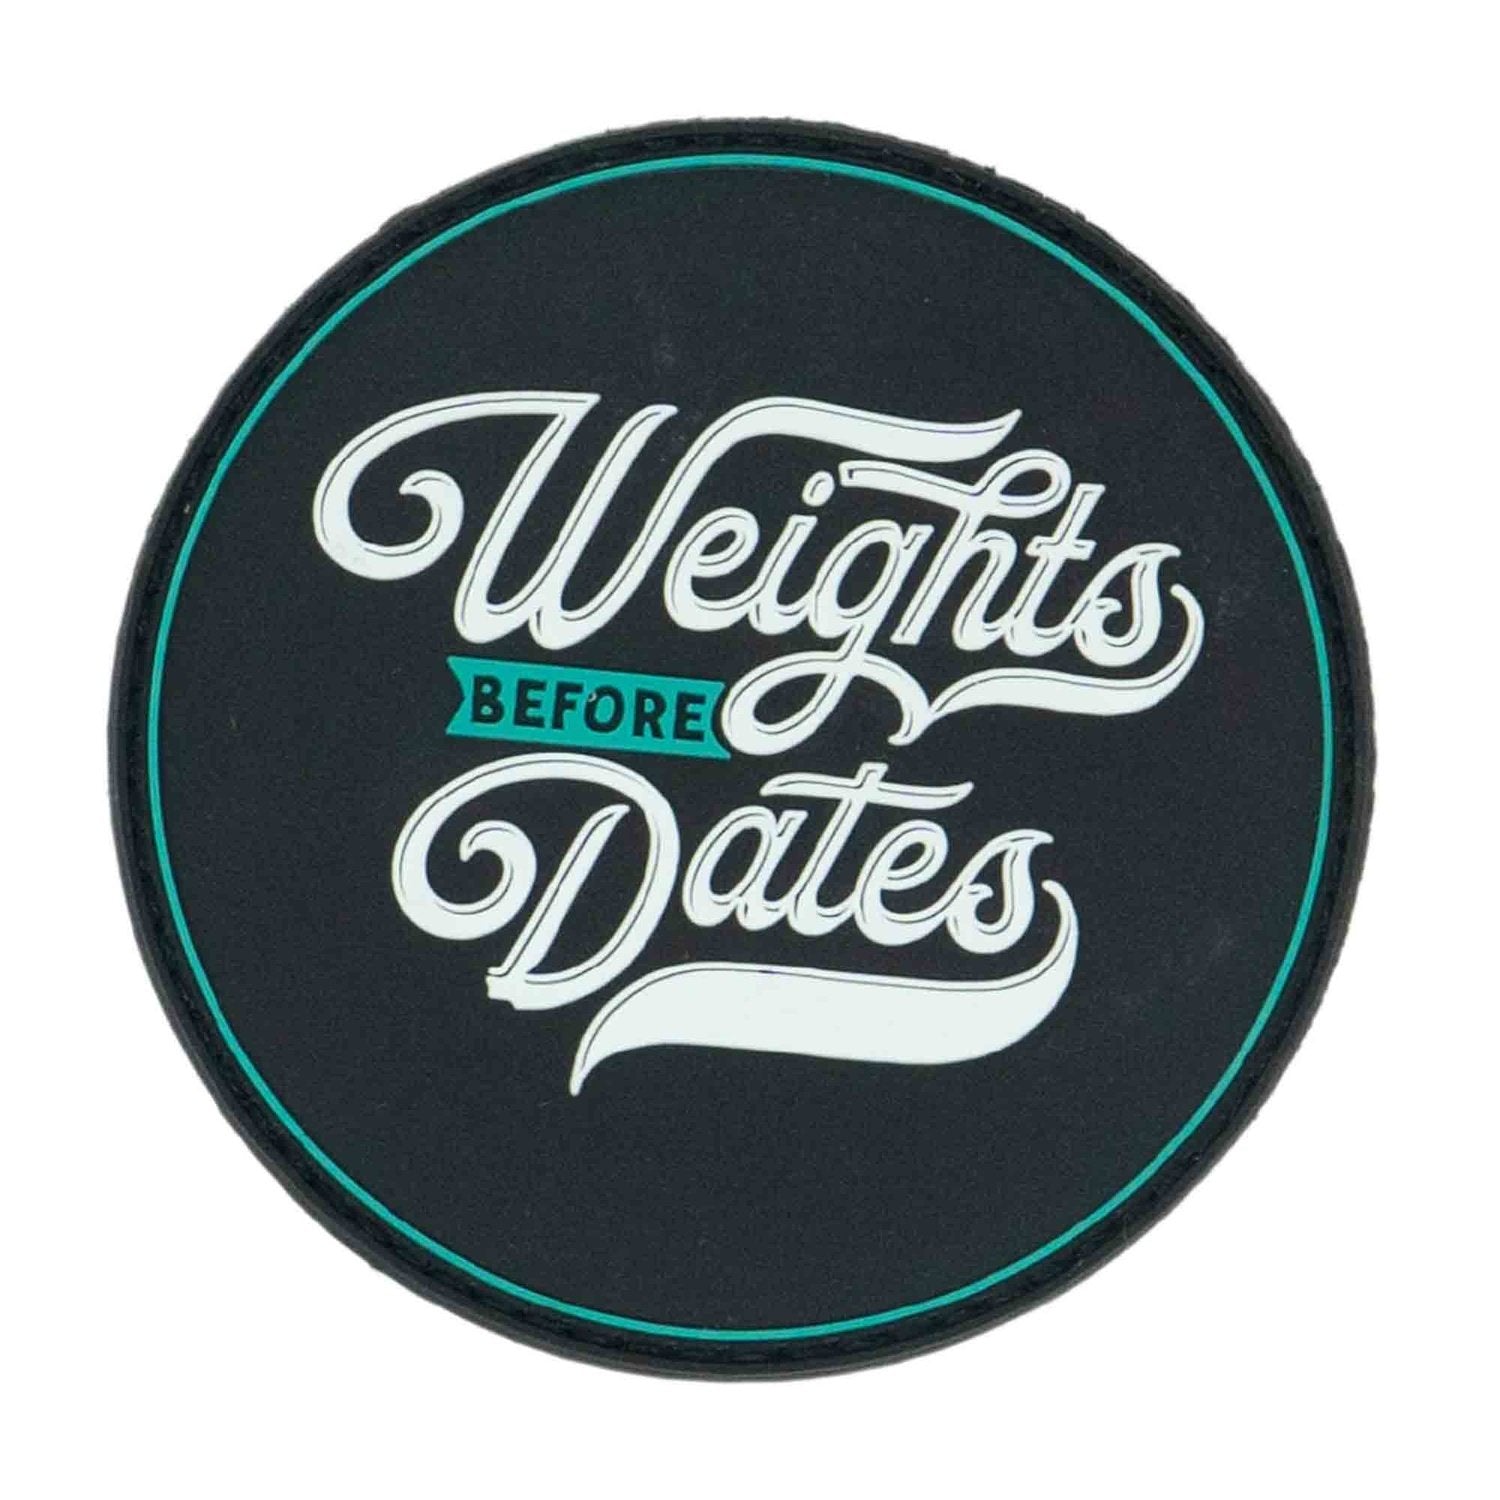 2POOD Weights Before Dates Velcro Patch kaufen bei HighPowered.ch